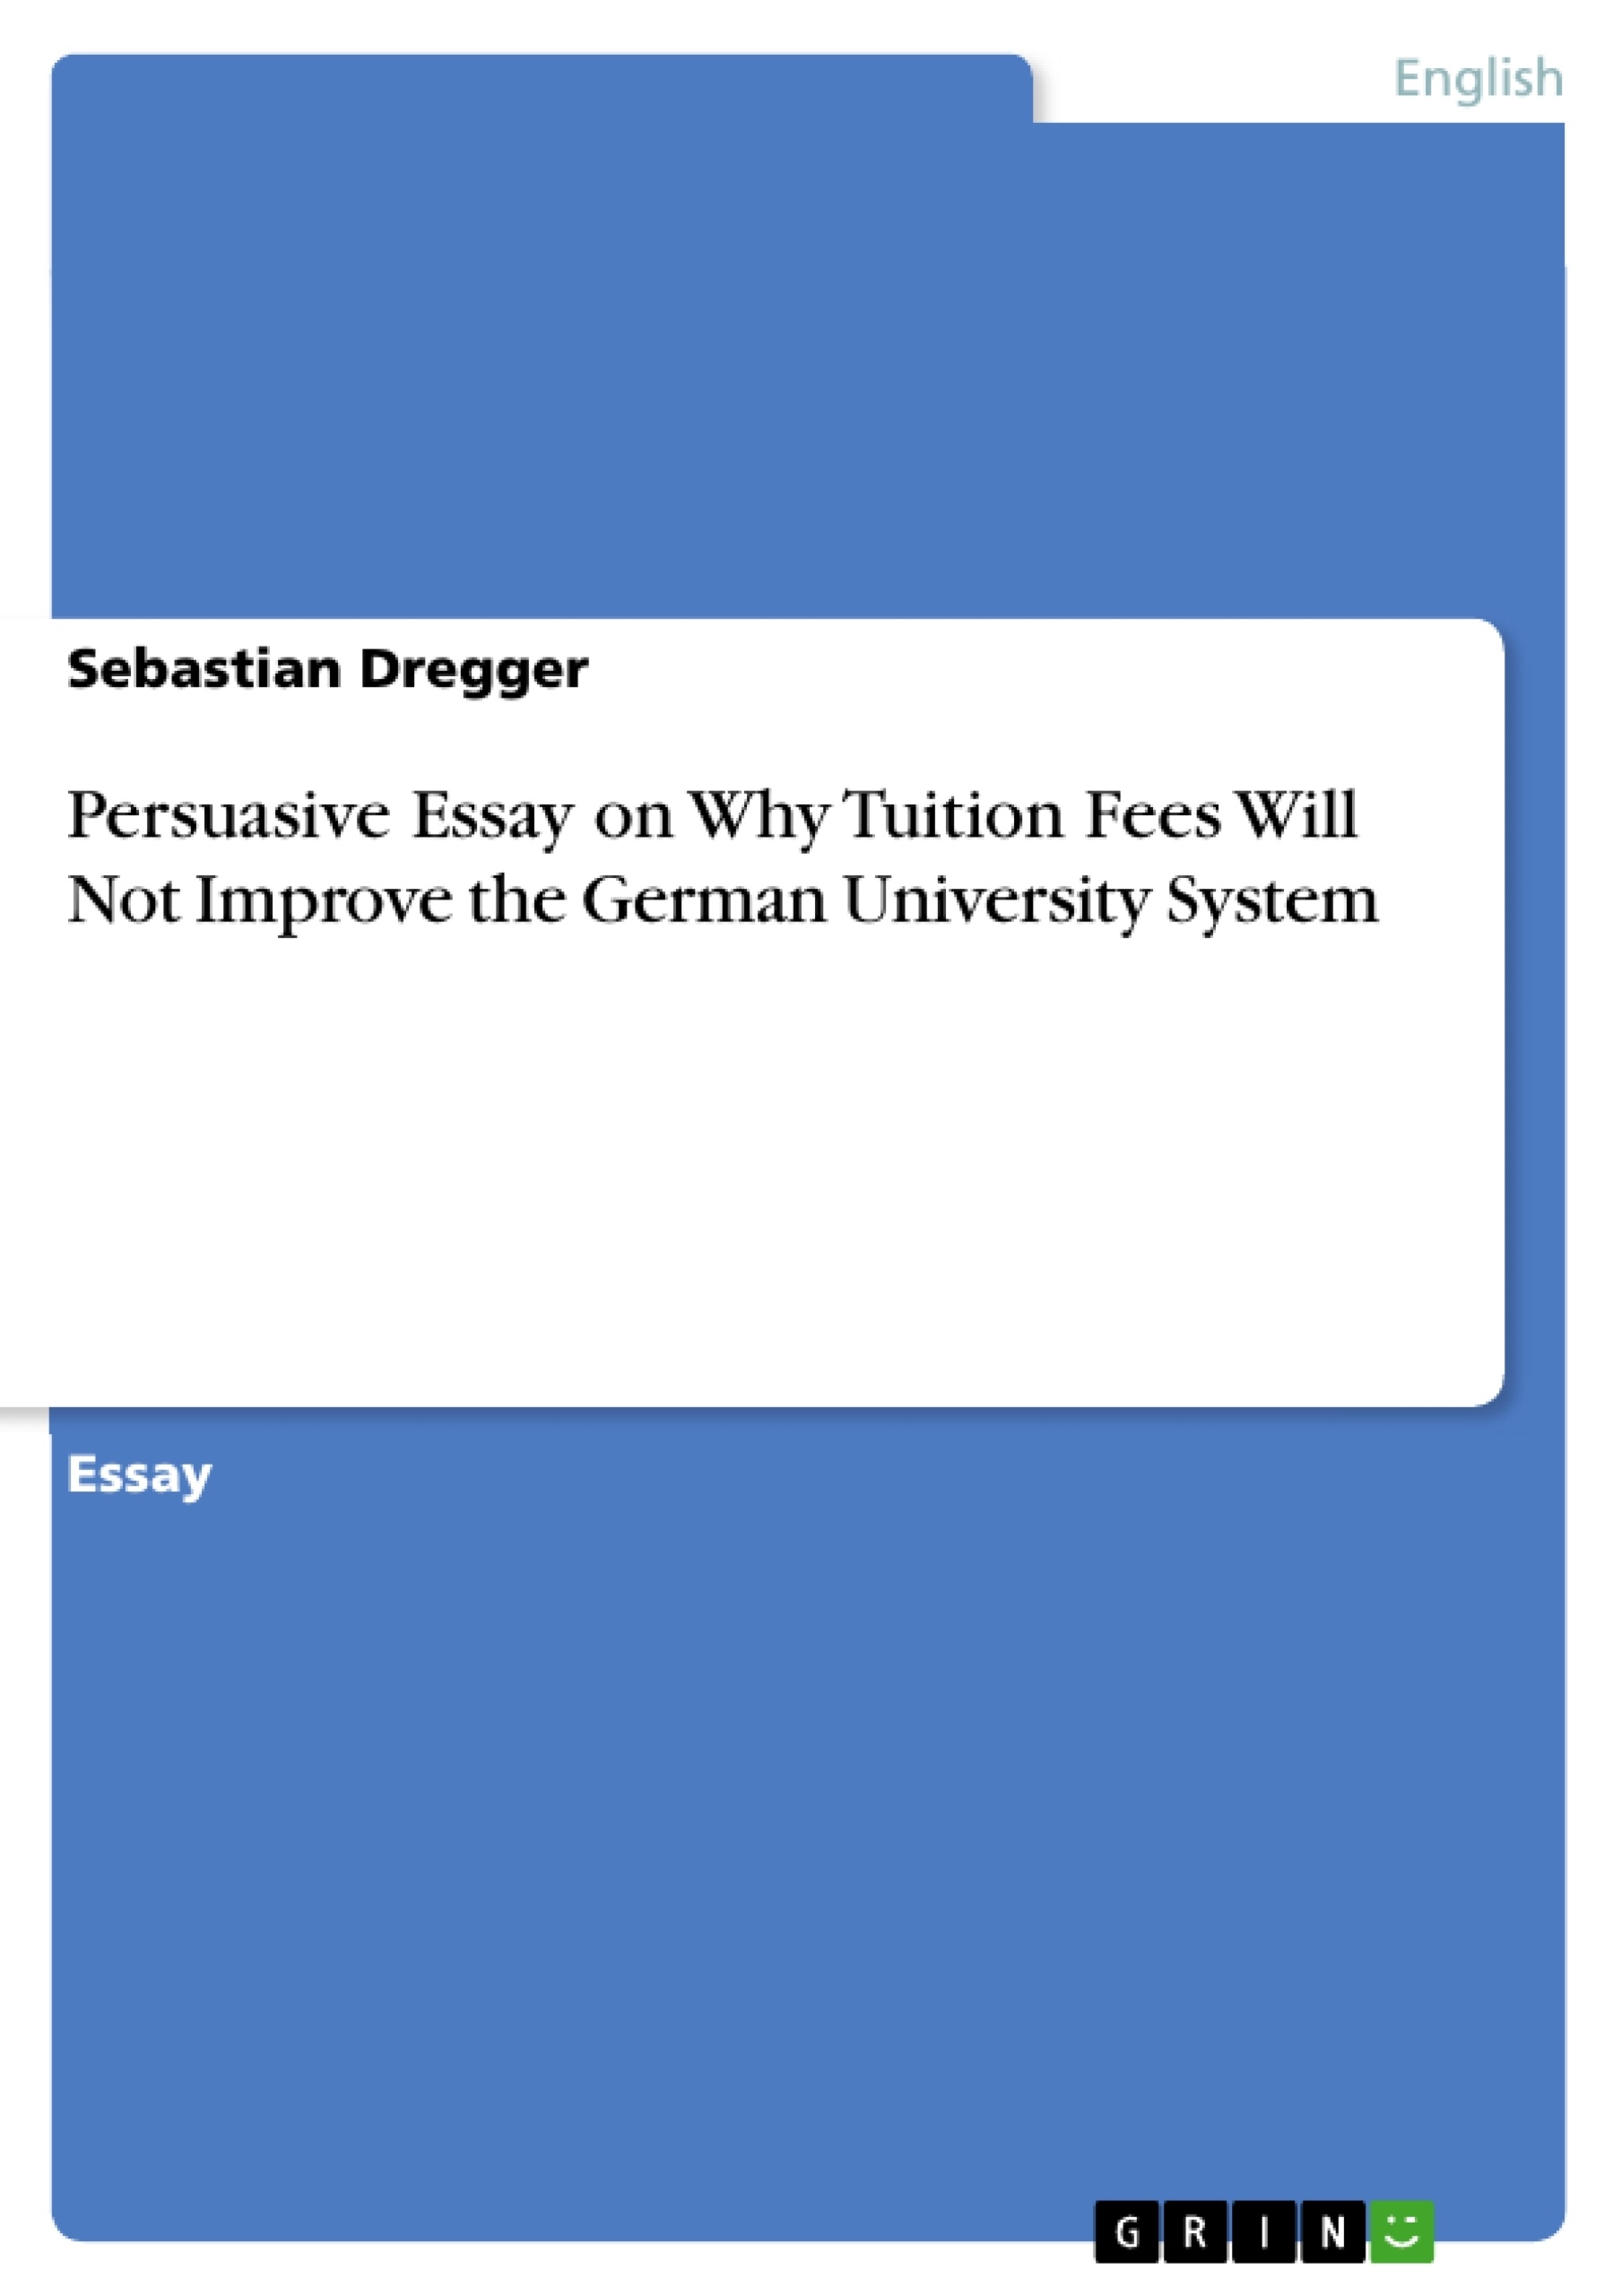 Titre: Persuasive Essay on Why Tuition Fees Will Not Improve the German University System 